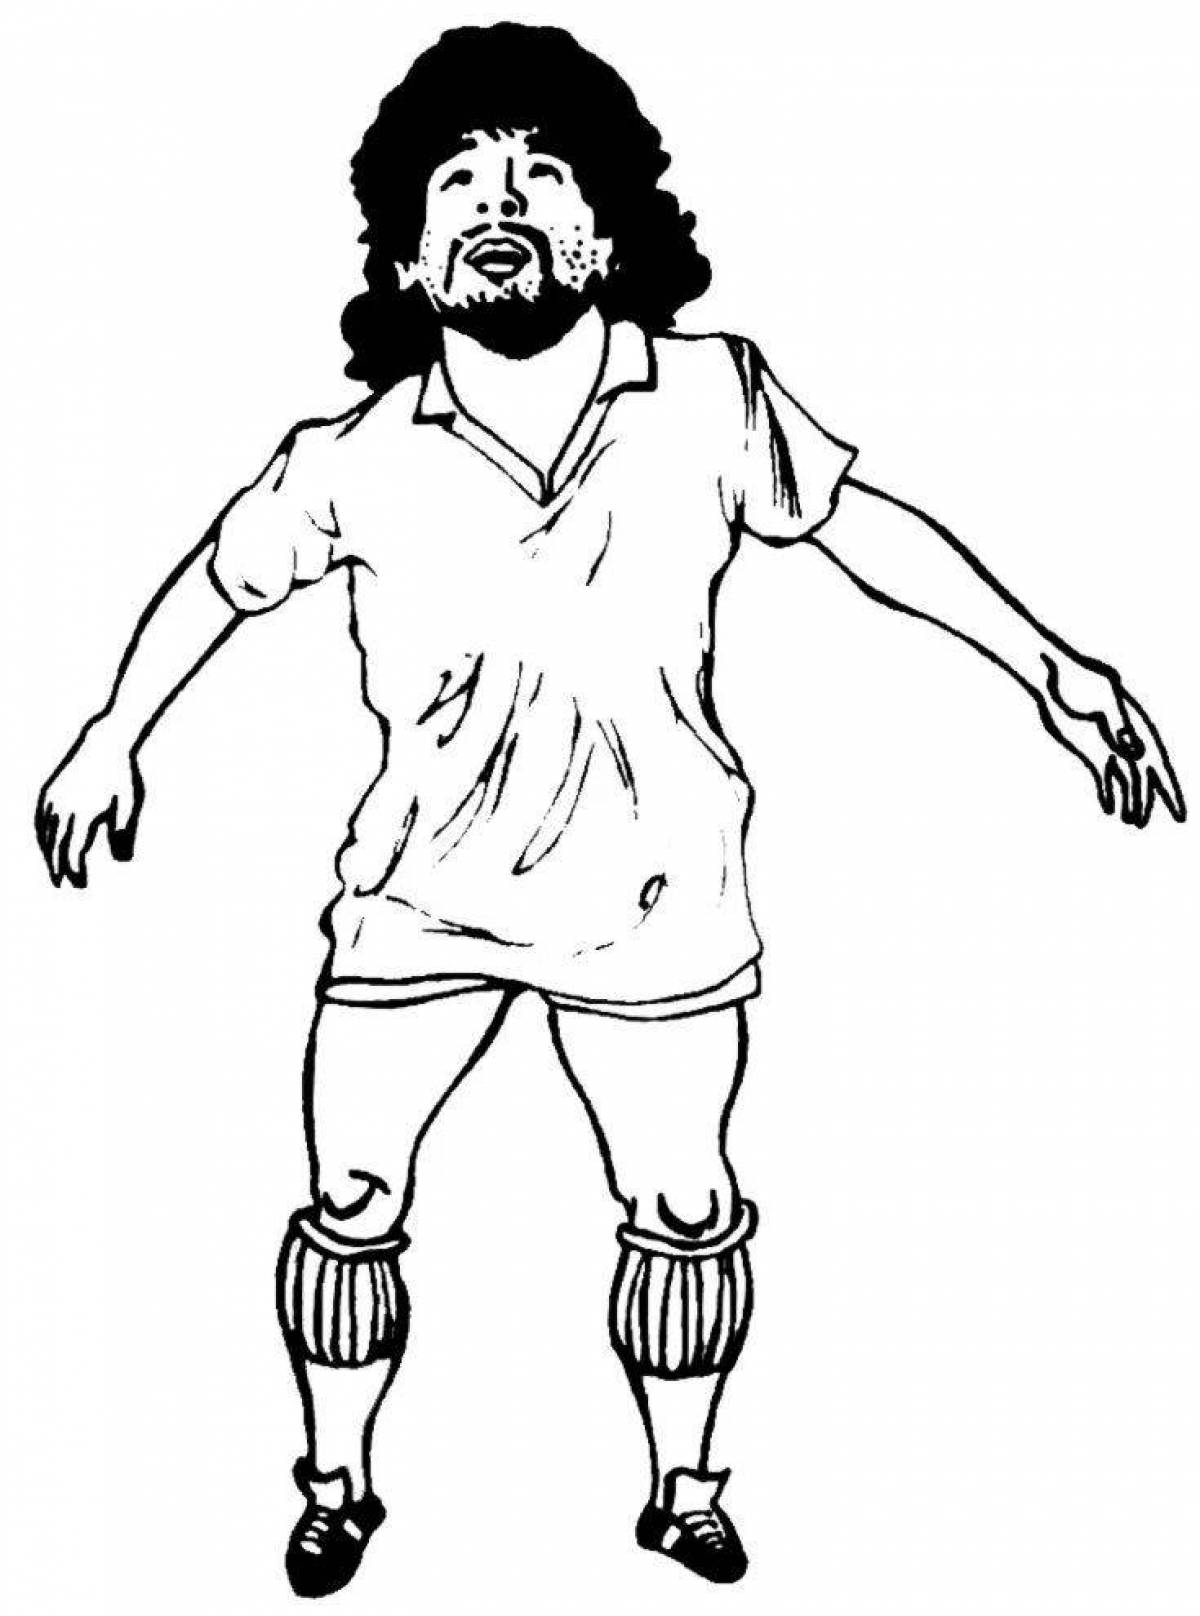 Coloring page funny football pele